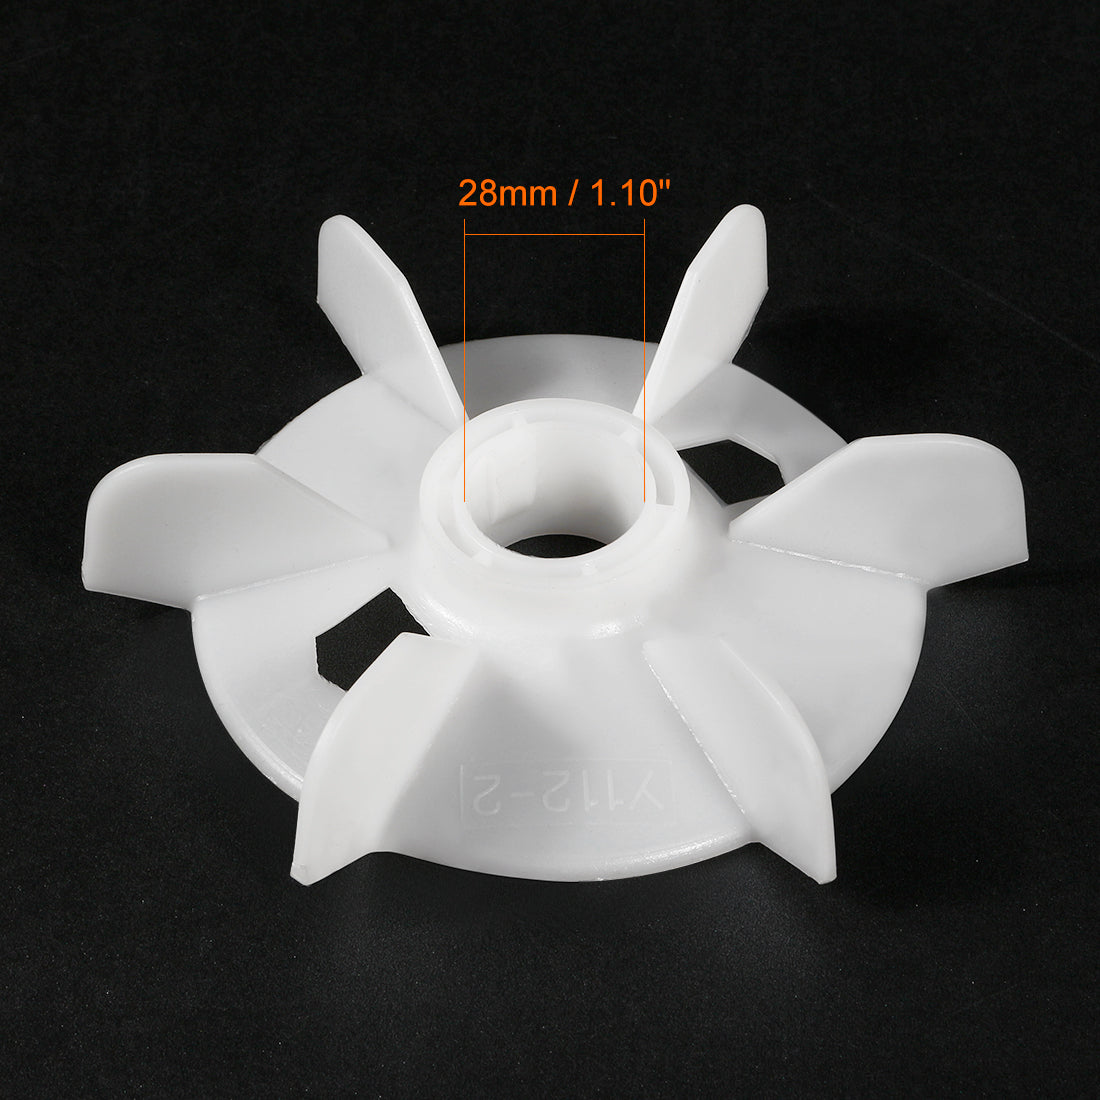 uxcell Uxcell 2Pcs 150*28mm Round Shaft Replacement White Plastic 6 Impeller Motor Fan Vane